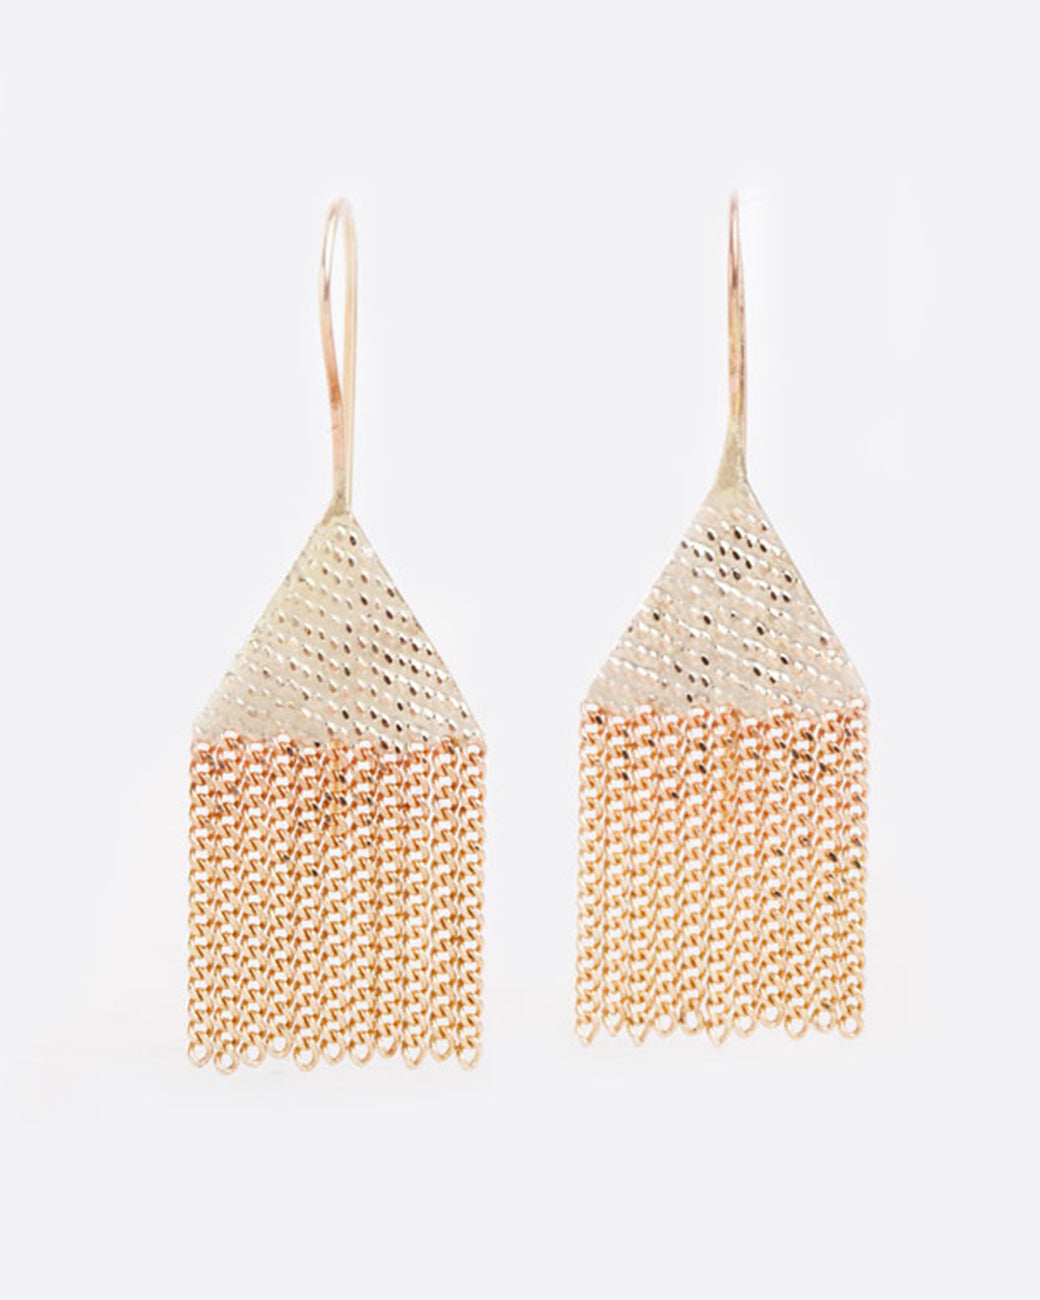 Triangular chain earrings with fringe drops, shown from the front.